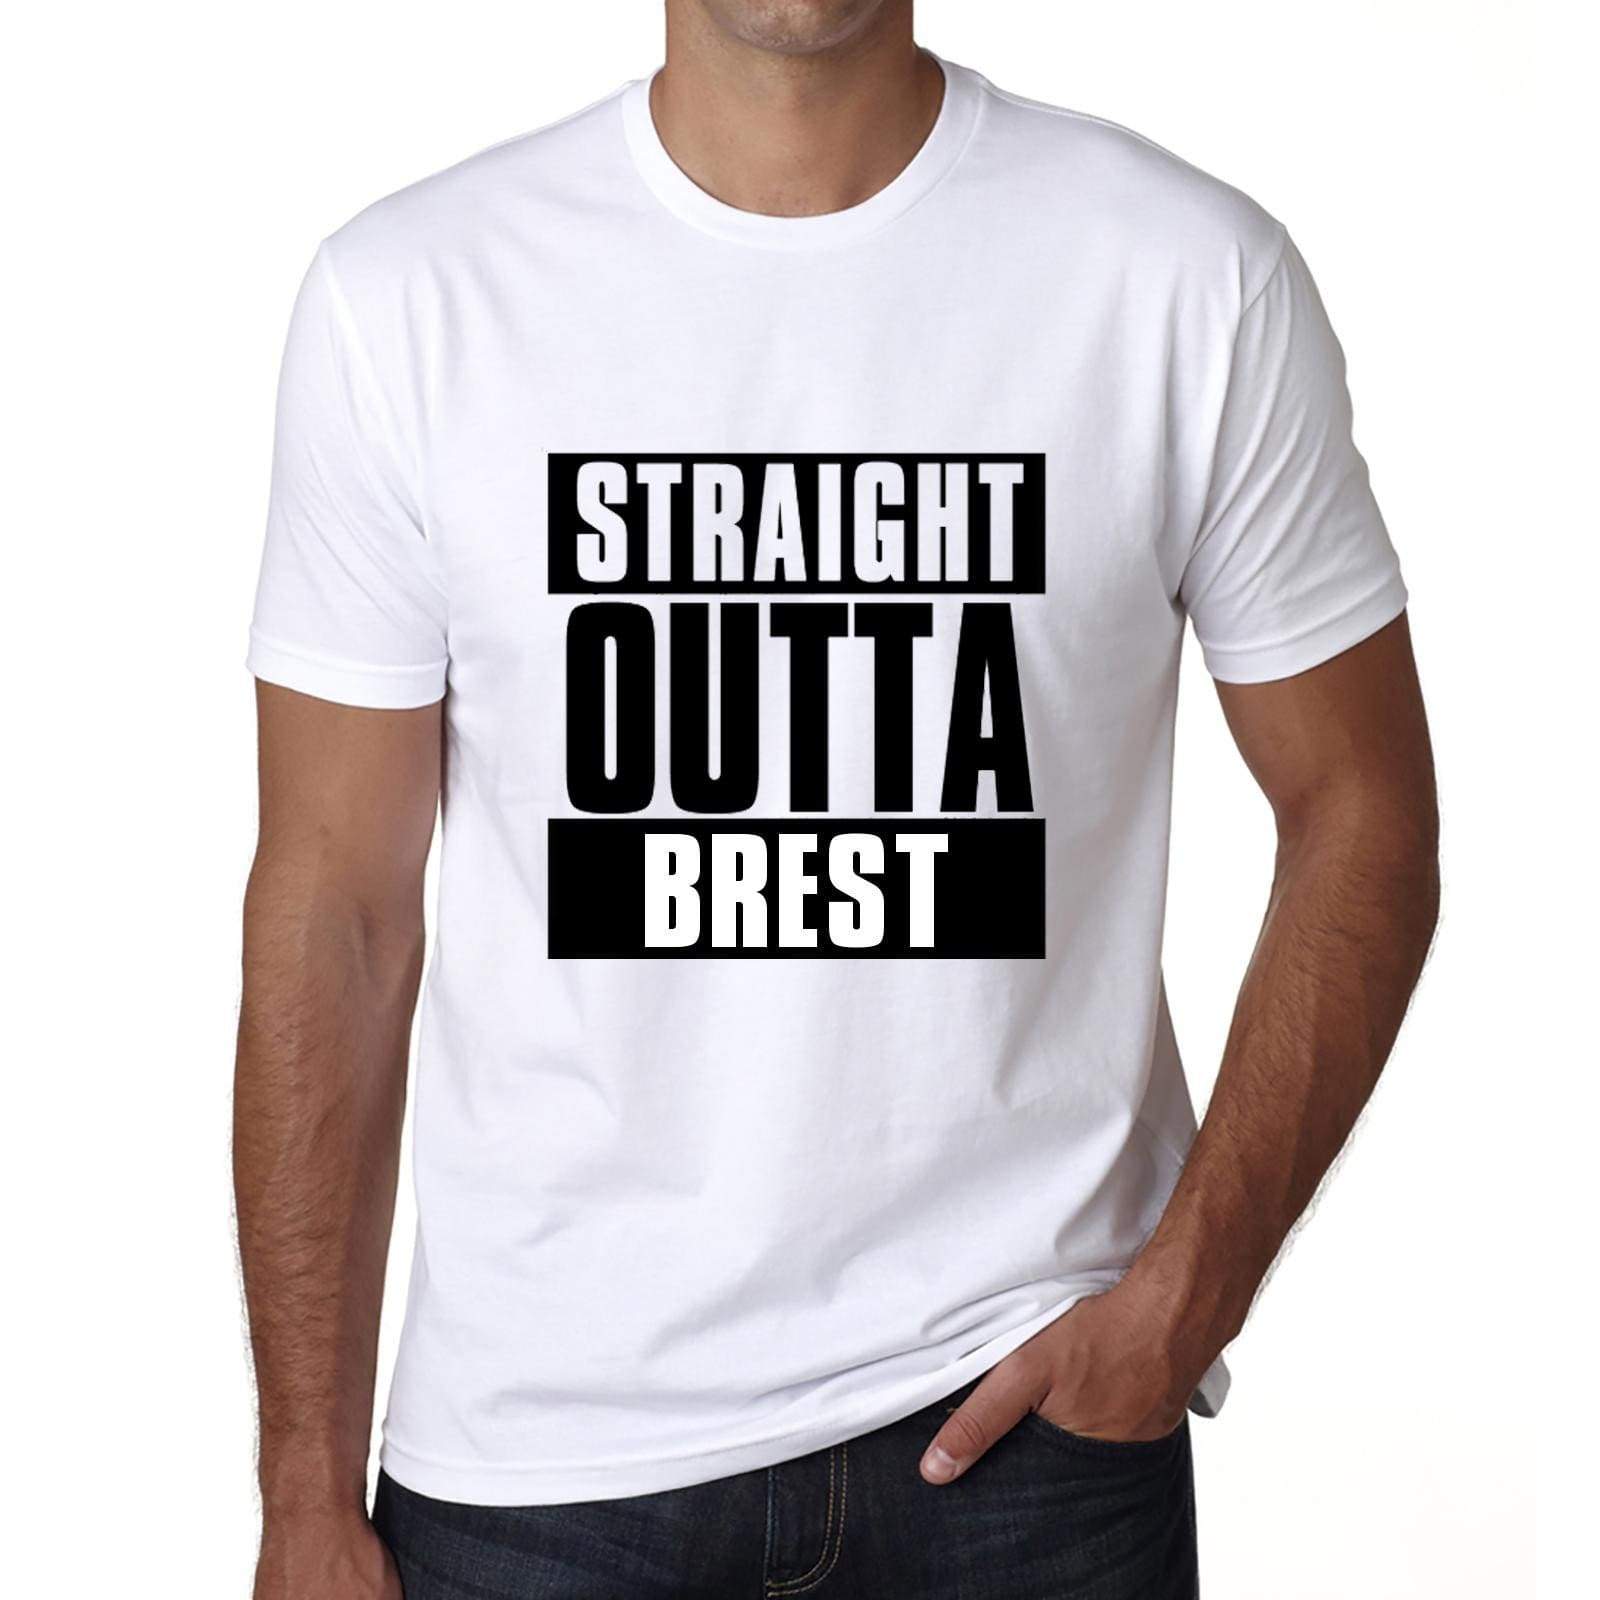 Straight Outta Brest Mens Short Sleeve Round Neck T-Shirt 00027 - White / S - Casual